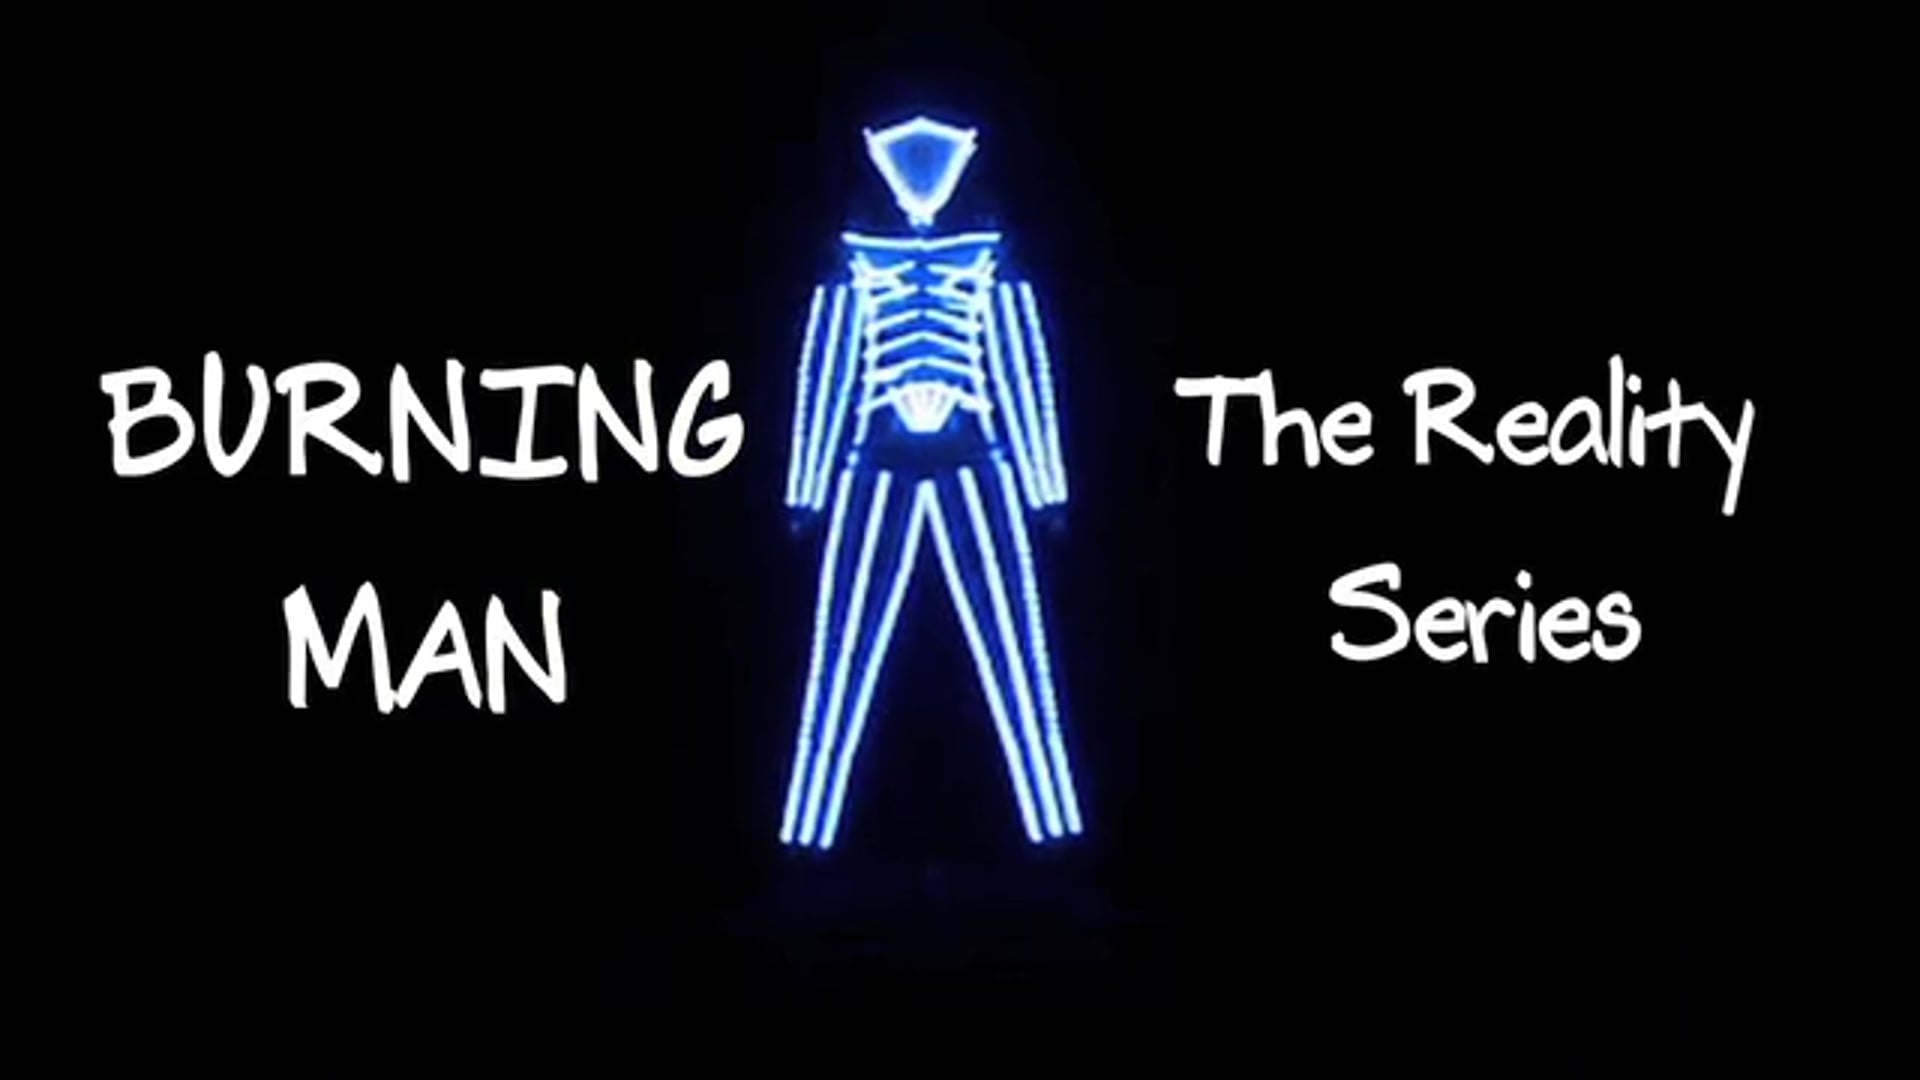 BURNING MAN - THE REALITY SERIES (Sizzle Reel)